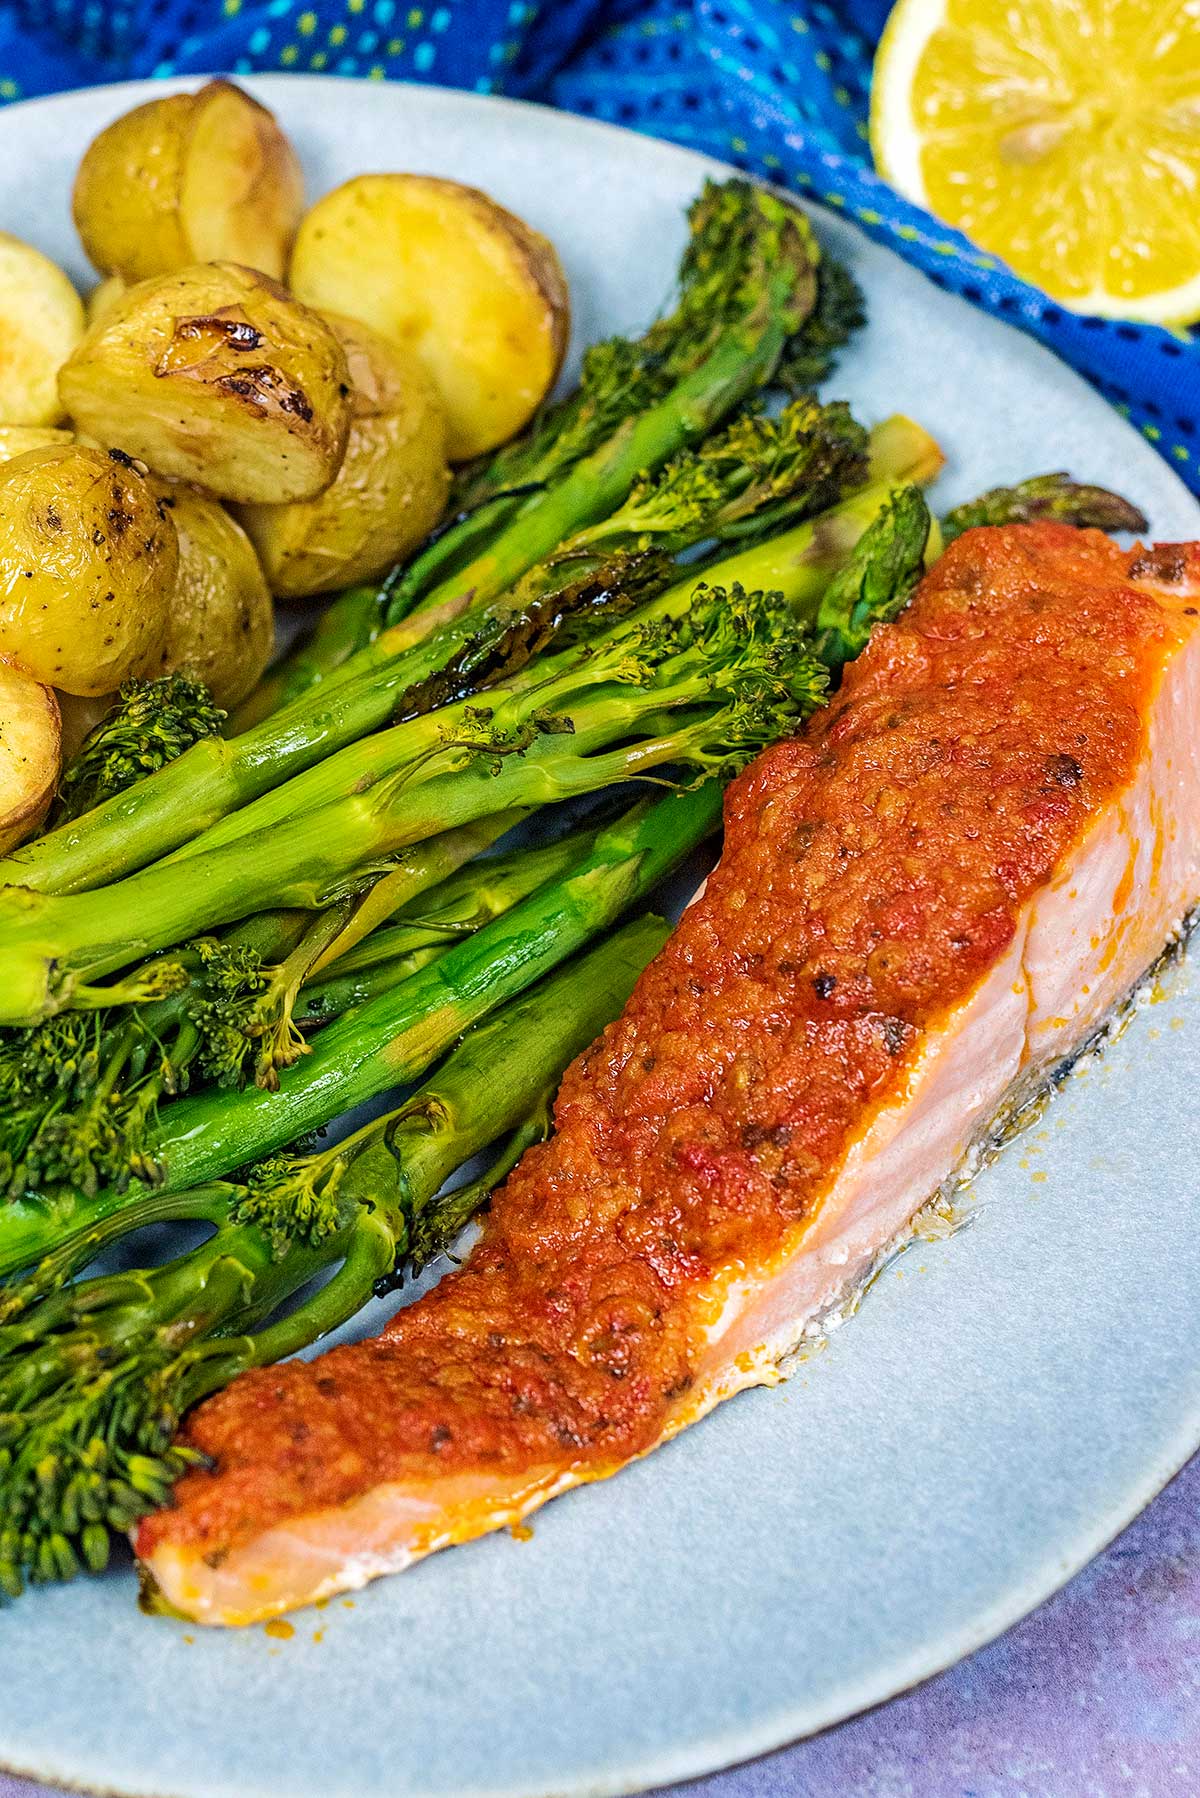 Red pesto on top of cooked salmon next to vegetables and potatoes.